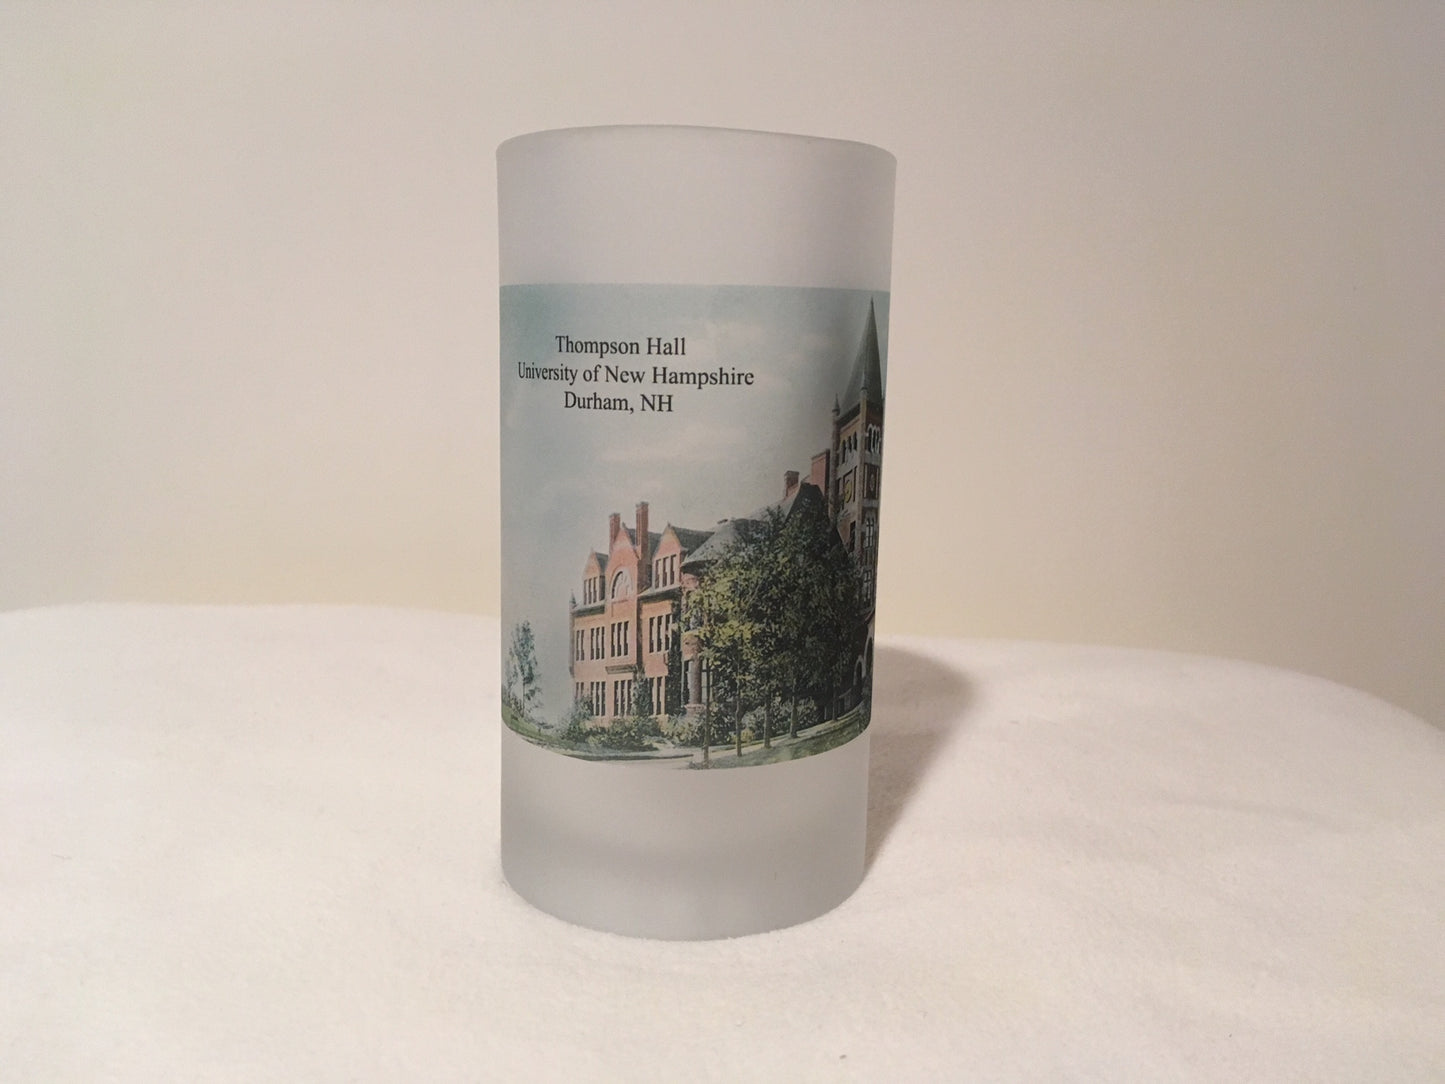 The University of New Hampshire Beer Mug Featuring Thompson Hall - That Fabled Shore Home Decor